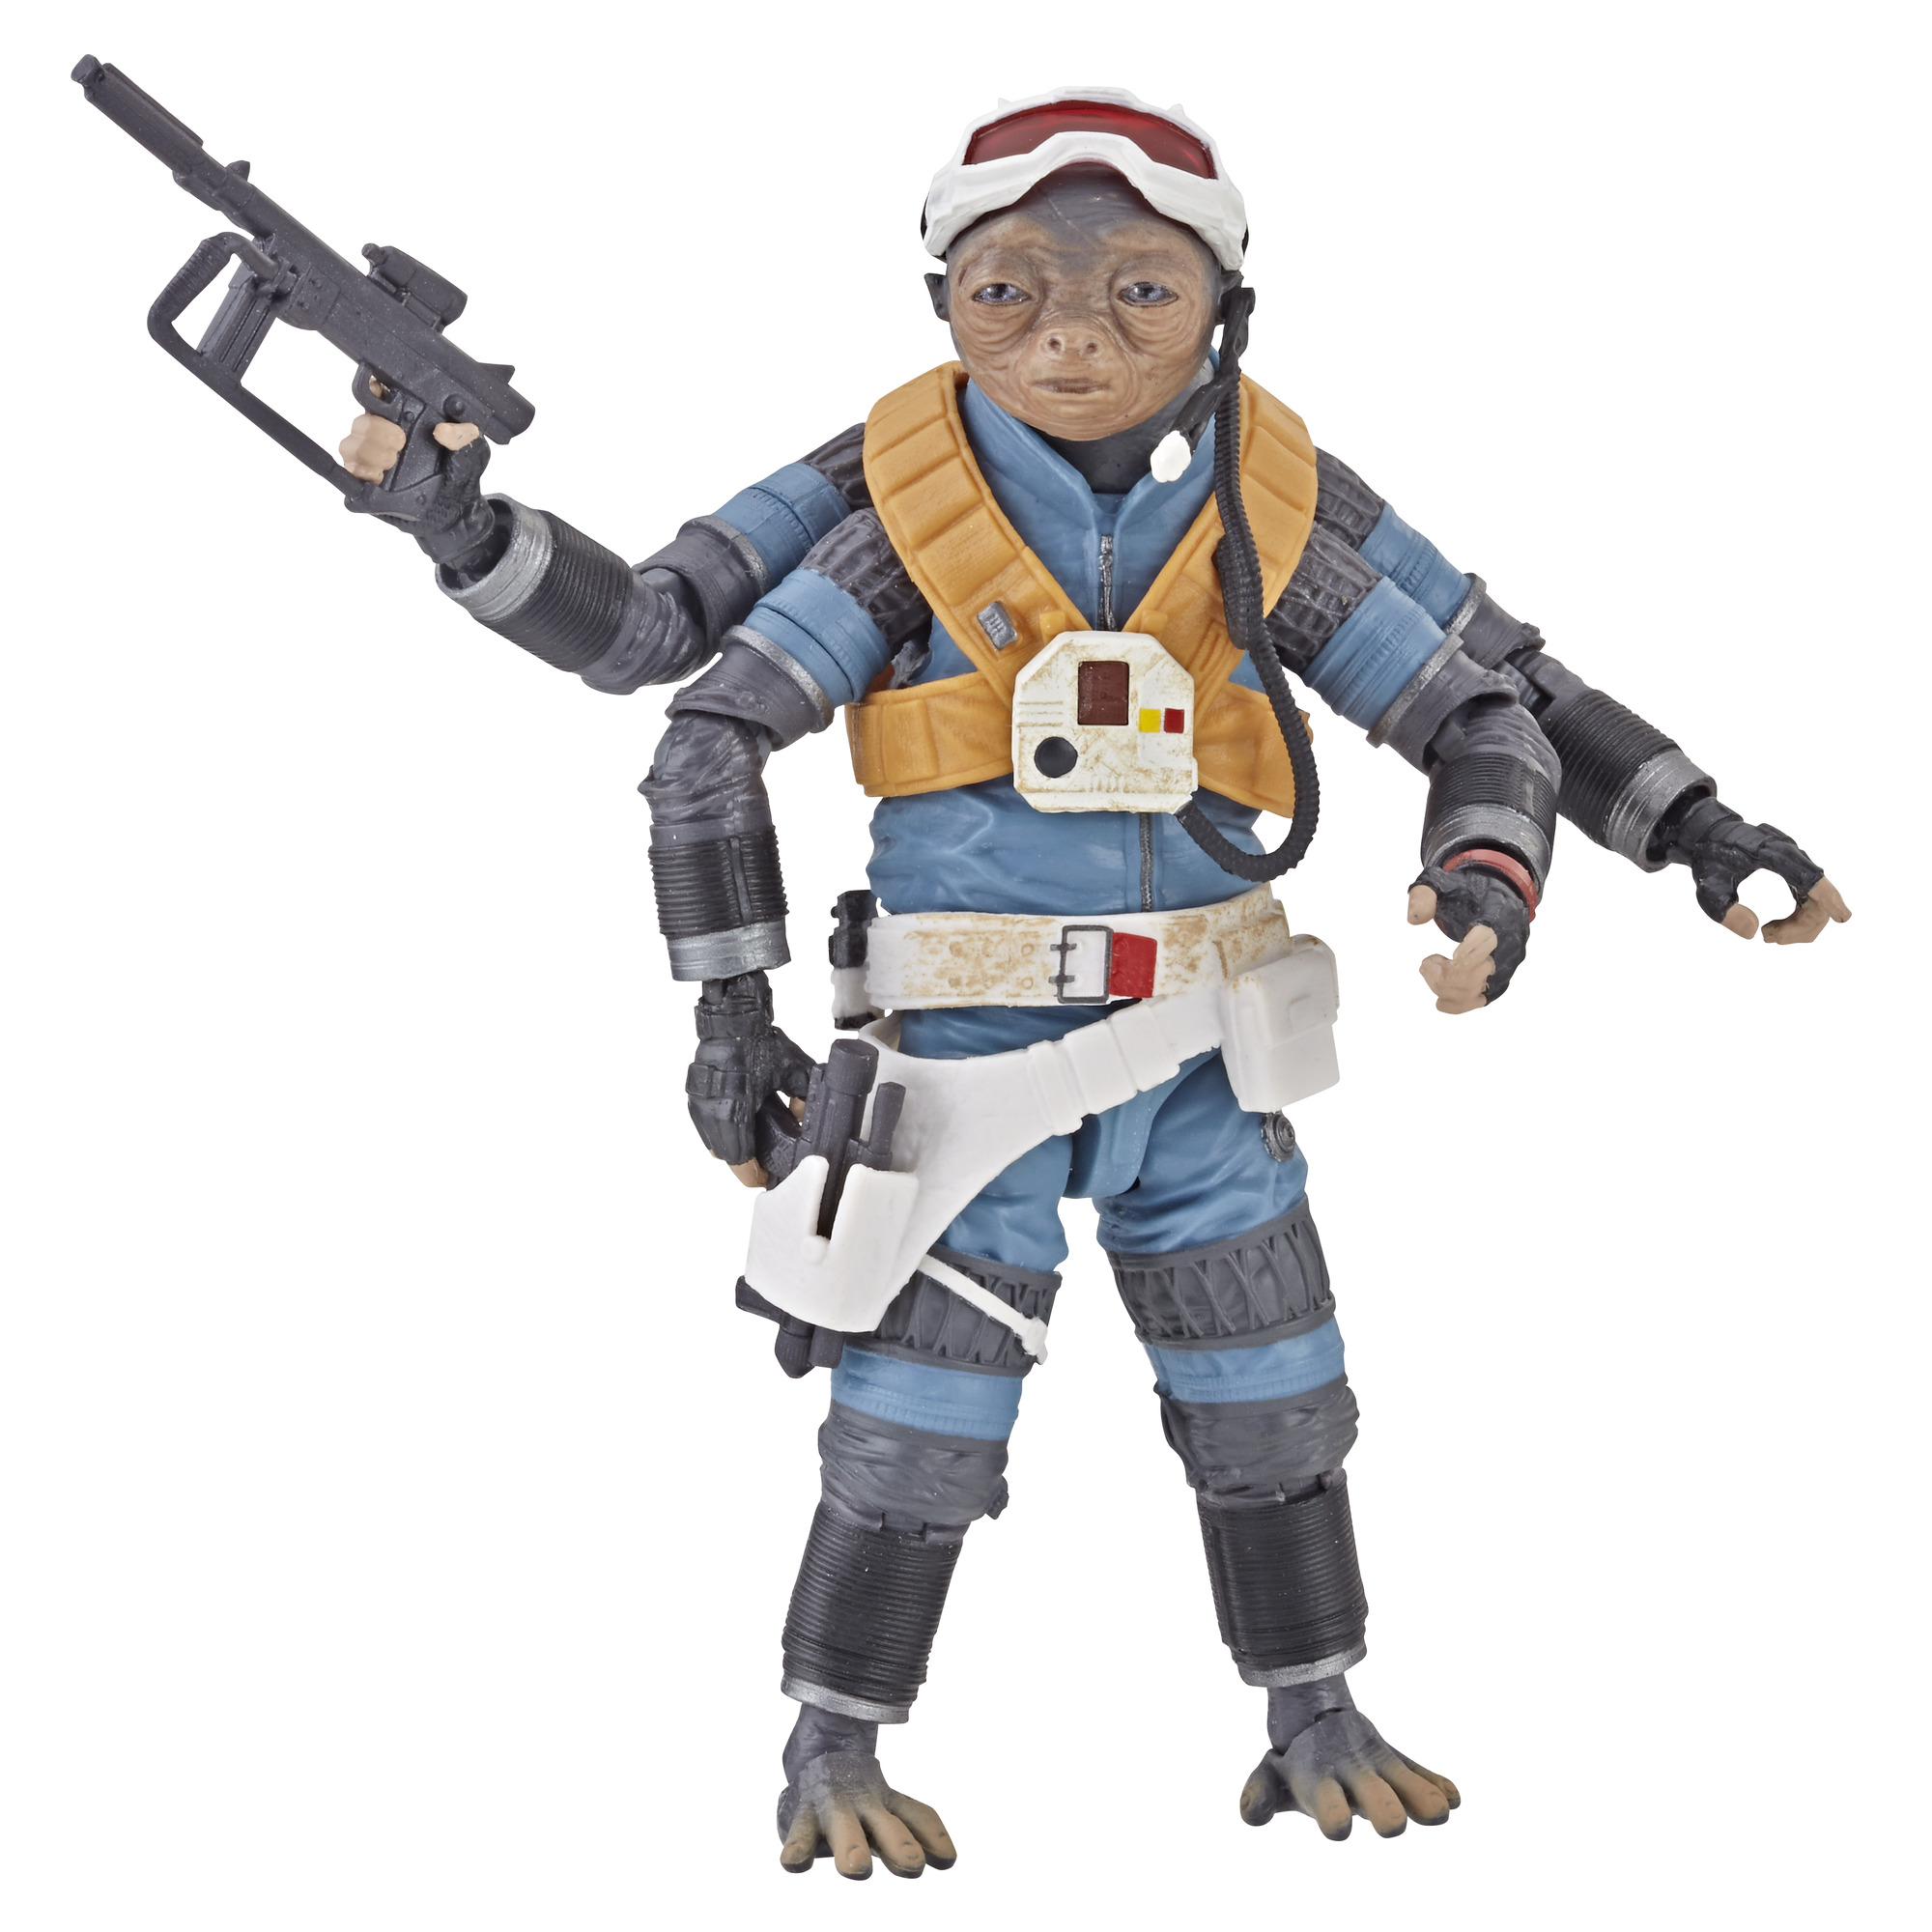 Star Wars The Black Series 6-inch Rio Durant figure - image 1 of 2